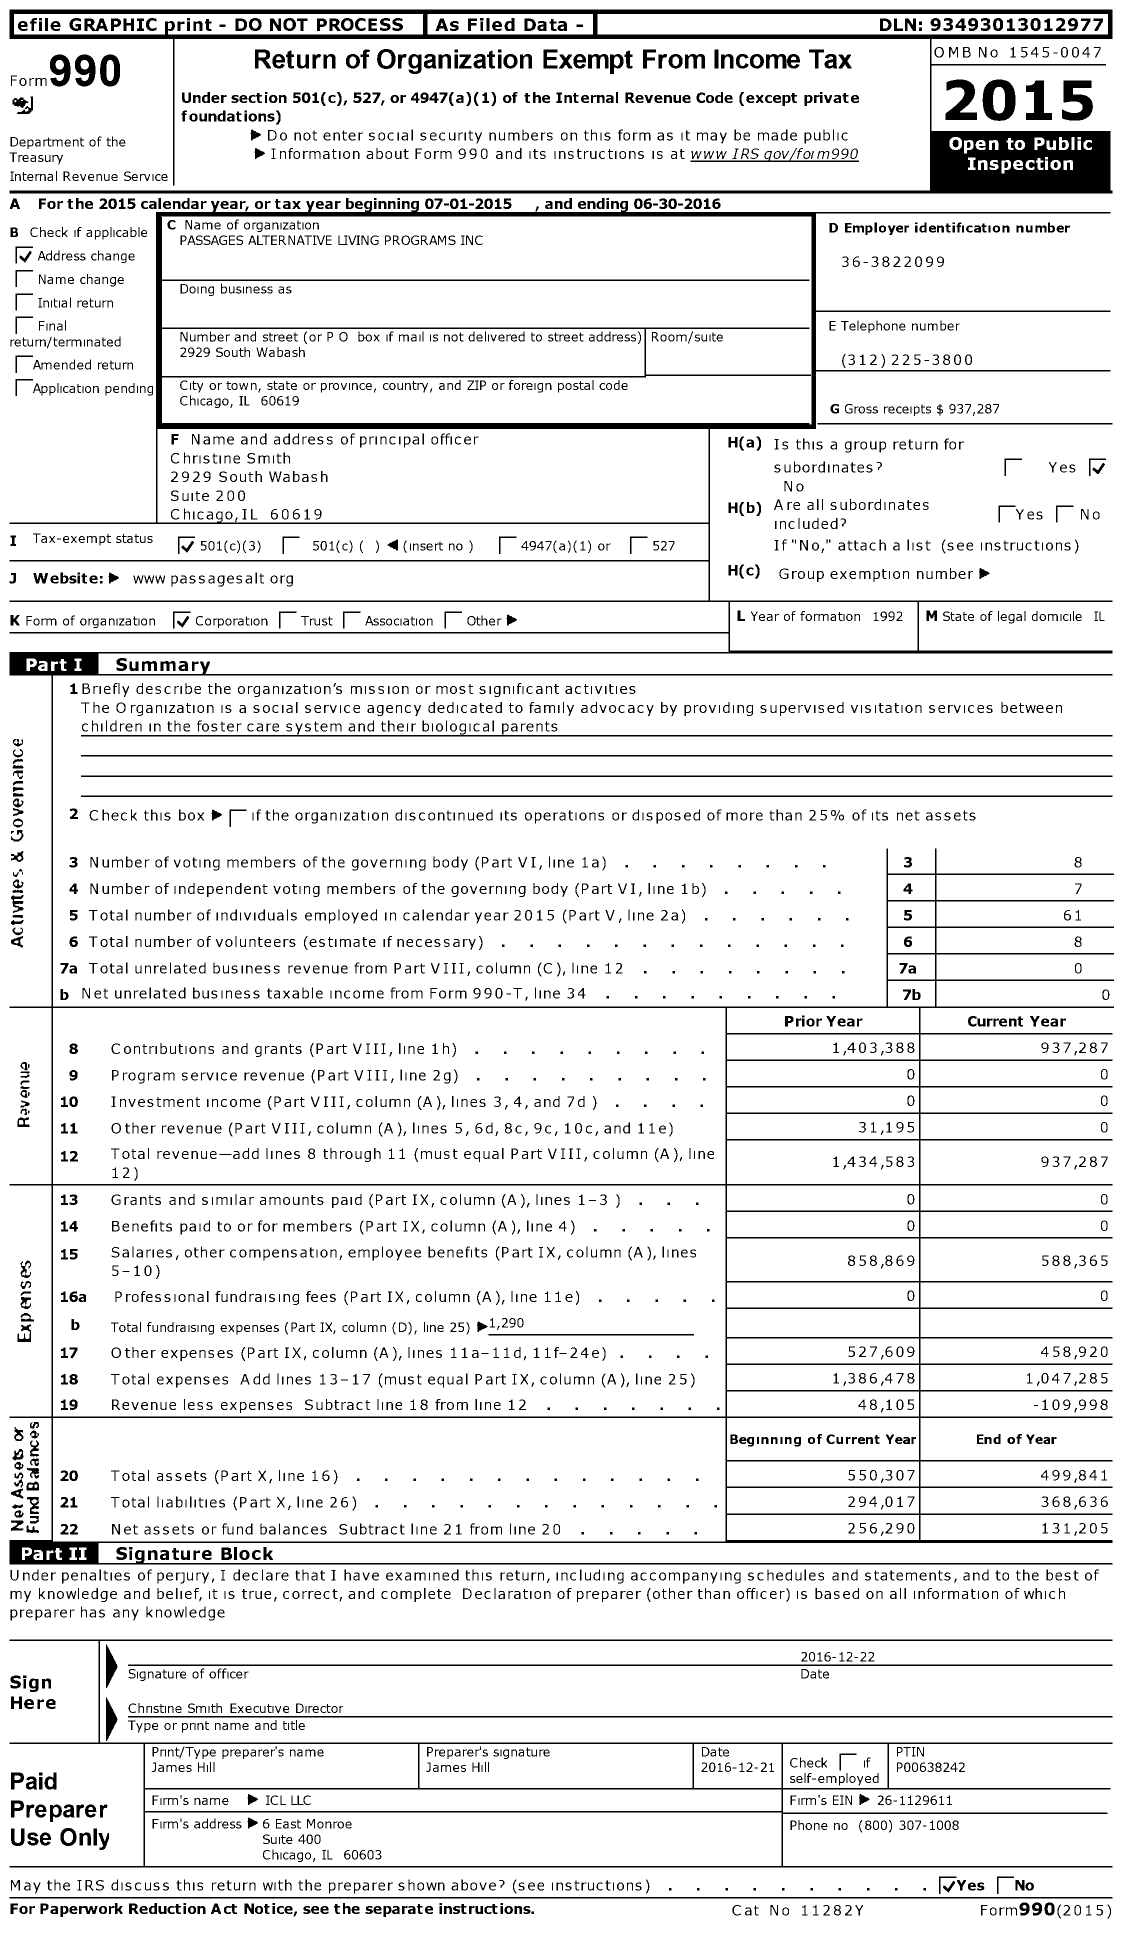 Image of first page of 2015 Form 990 for Passages Alternative Living Programs